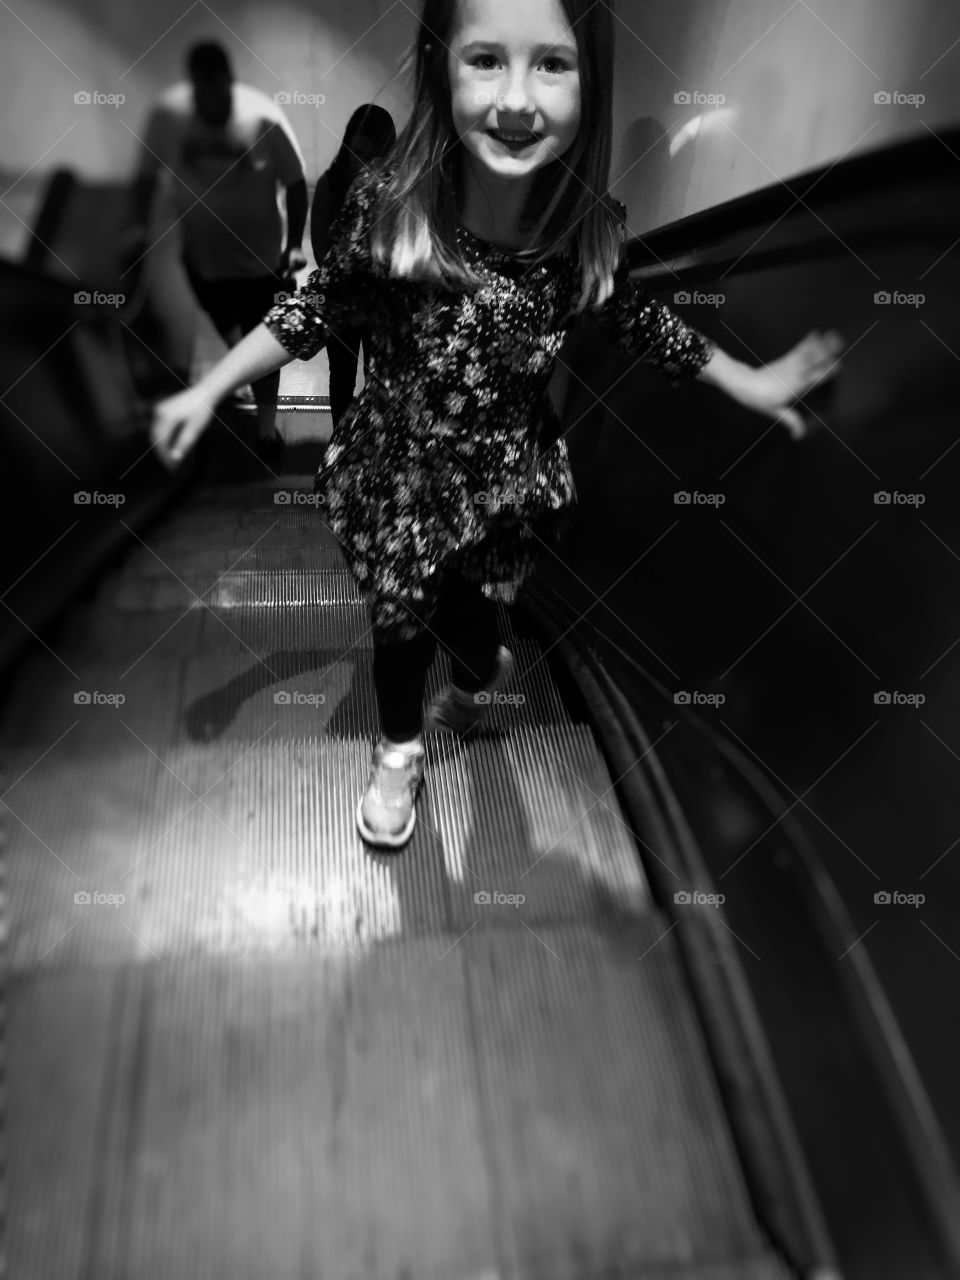 A little girl on escalator in station